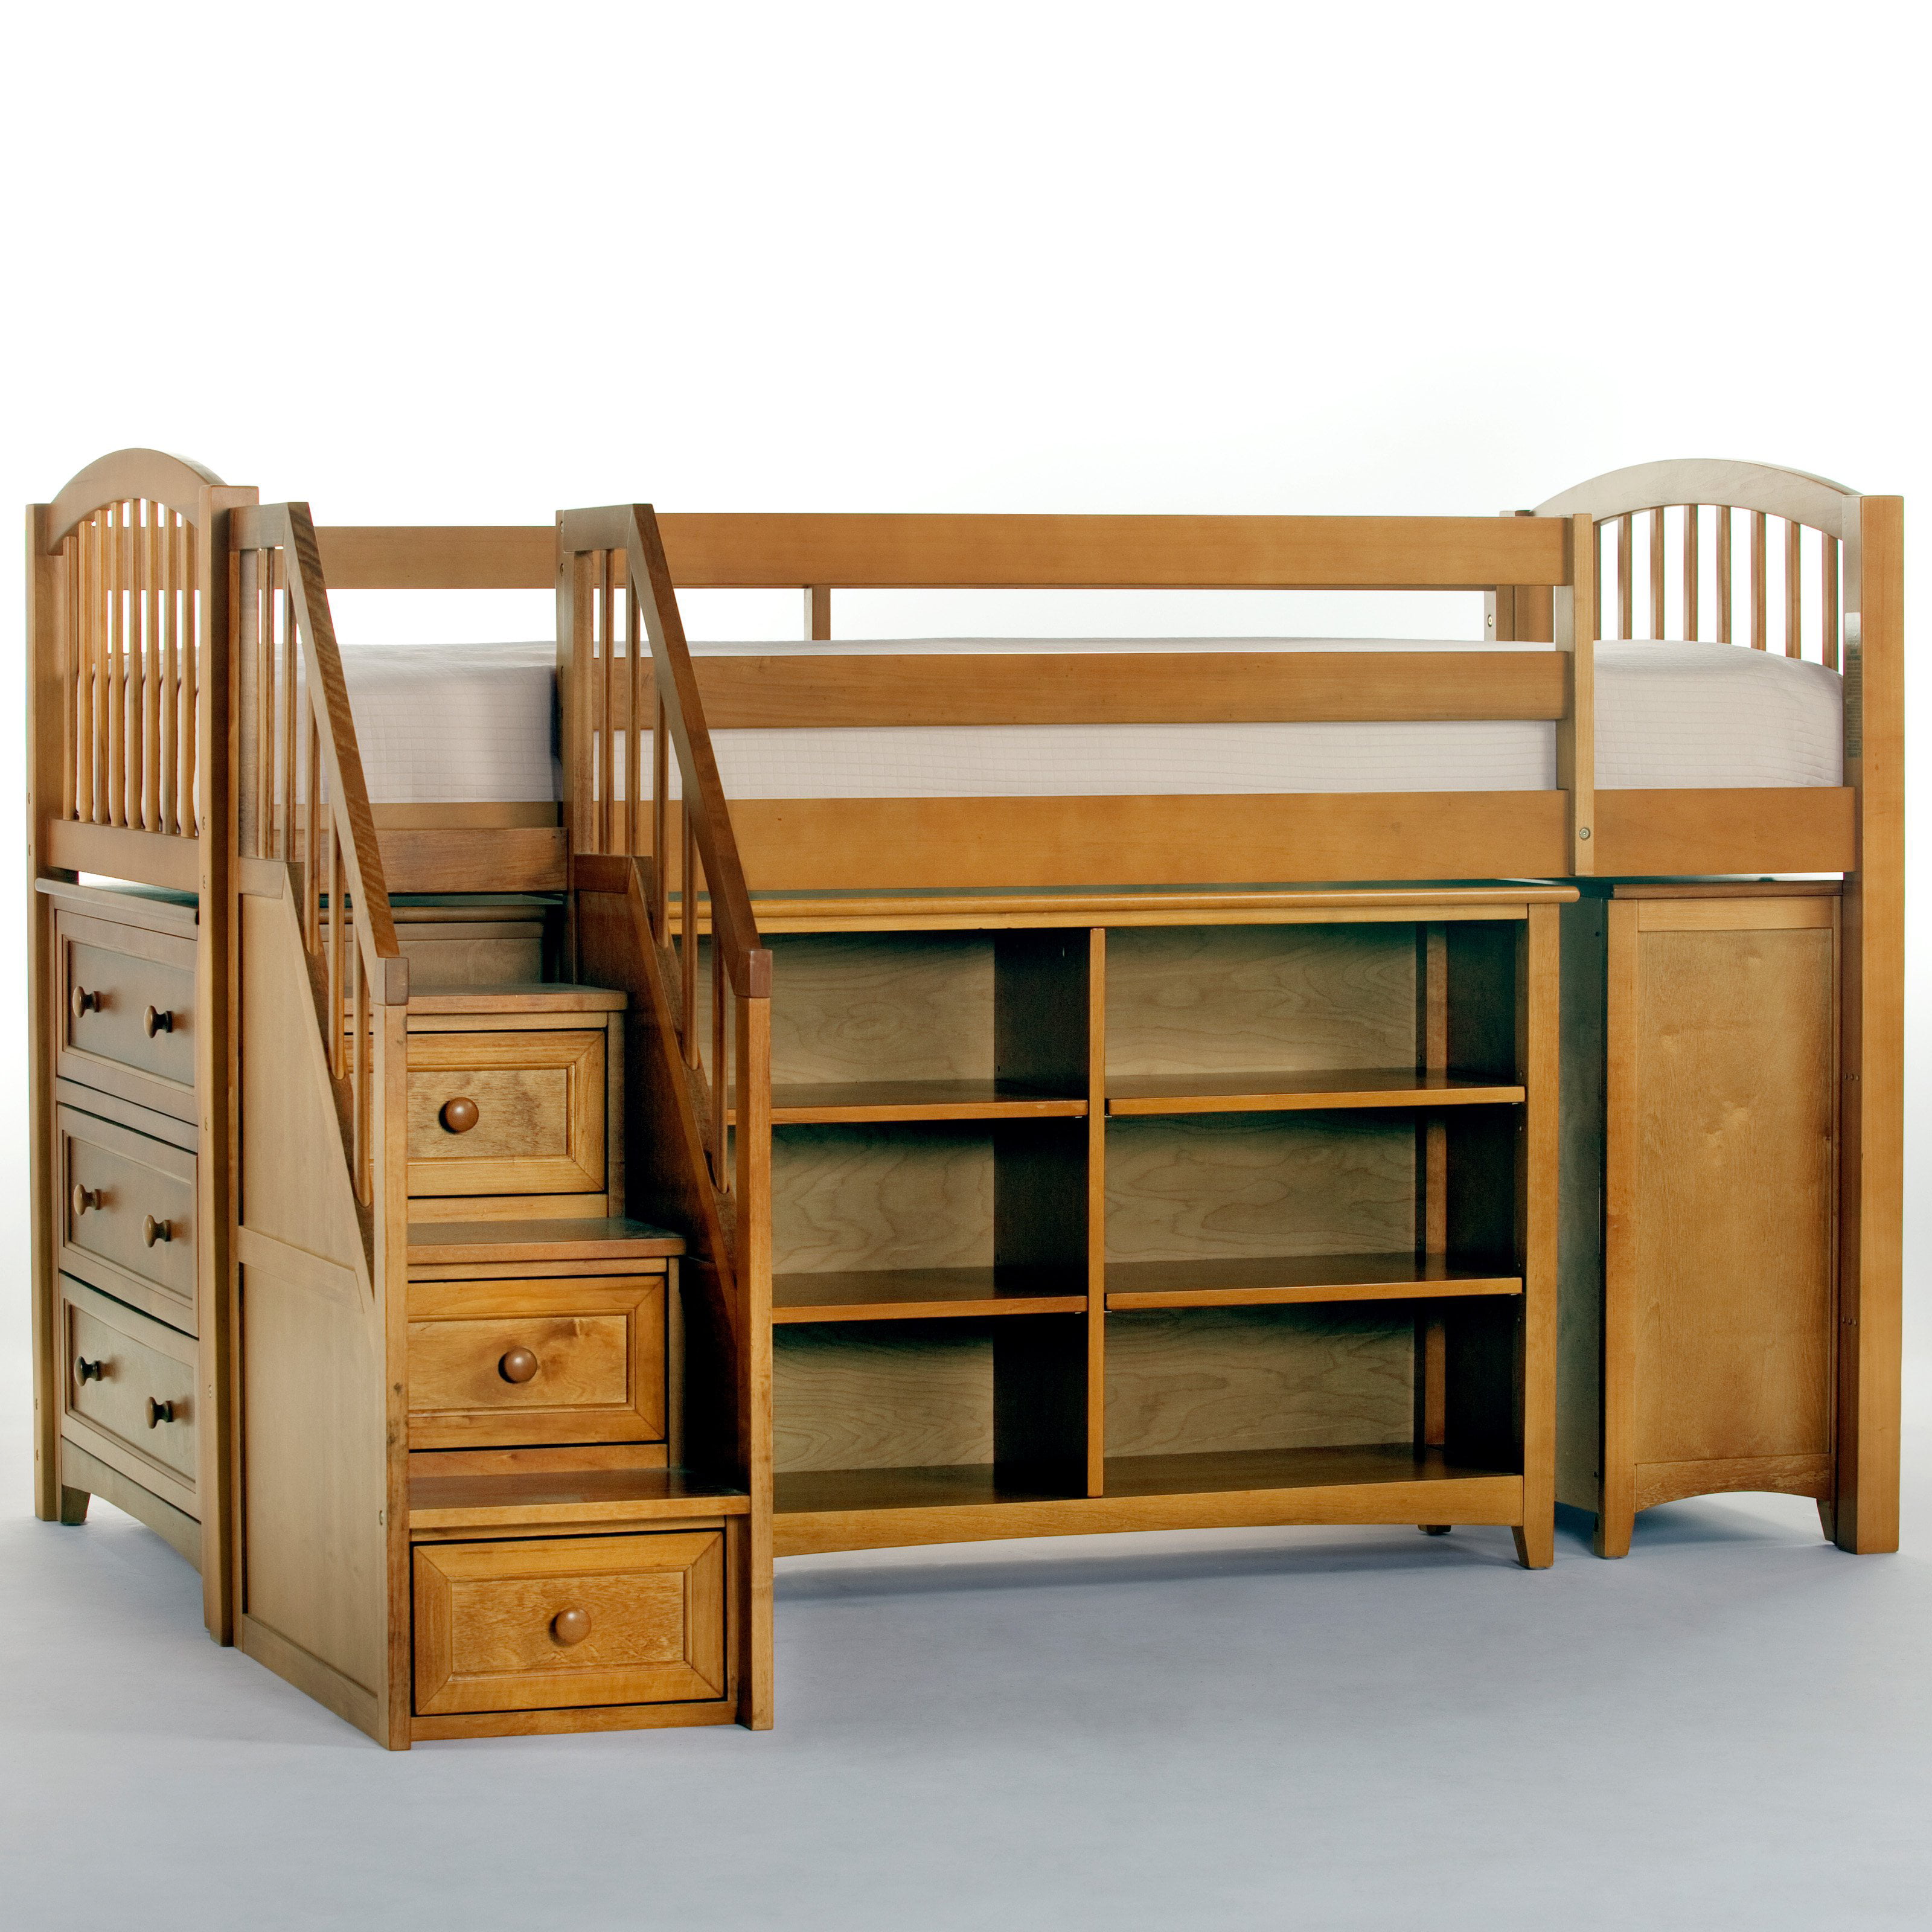 Schoolhouse Storage Junior Loft Bed, Junior Bunk Bed With Stairs